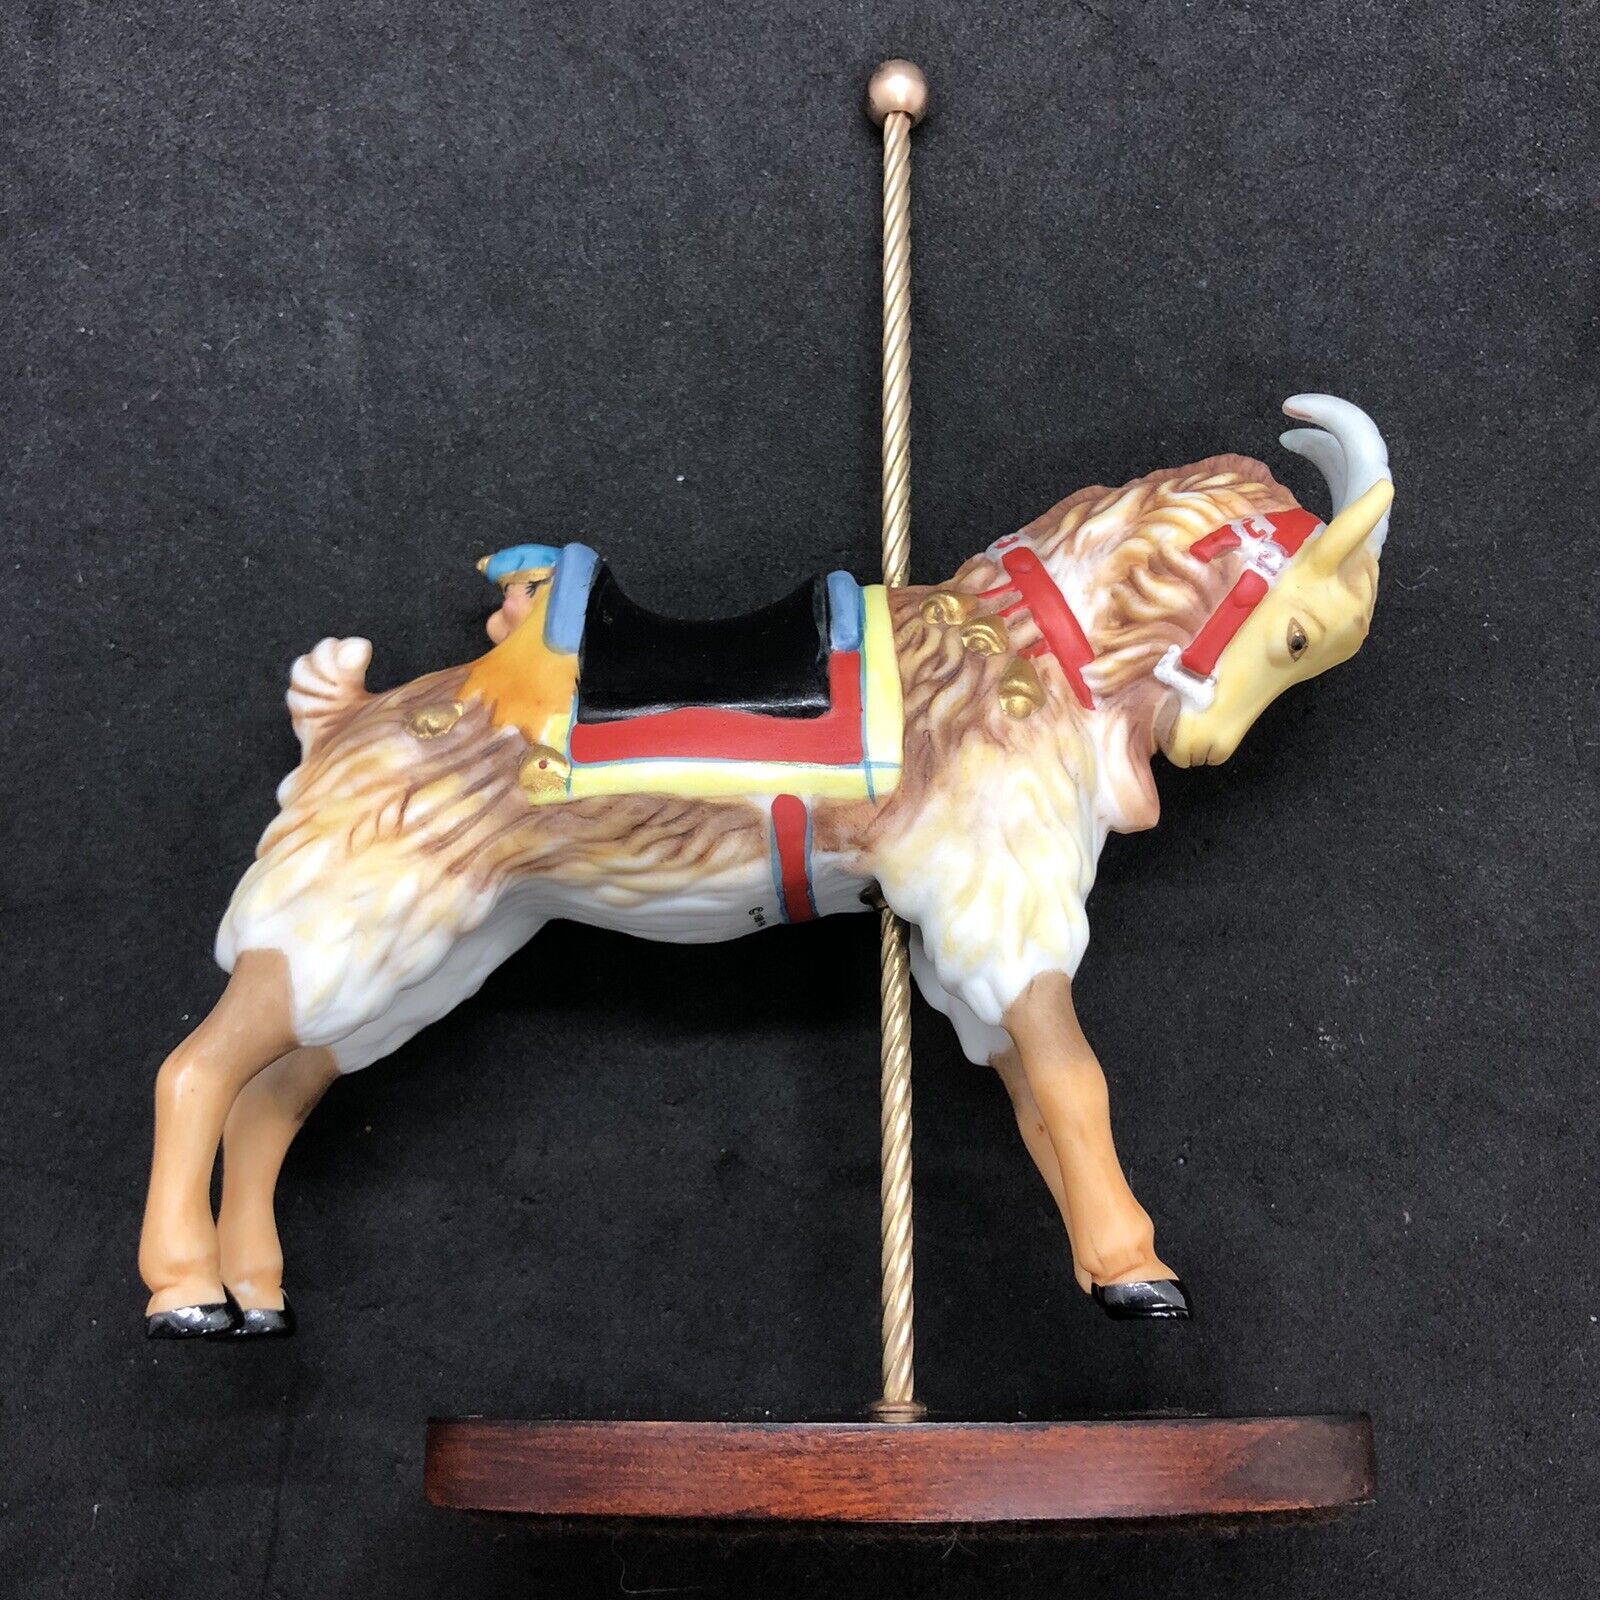 VTG Franklin Mint The Treasury Of Carousel Art Goat Animal By William Manns 1988